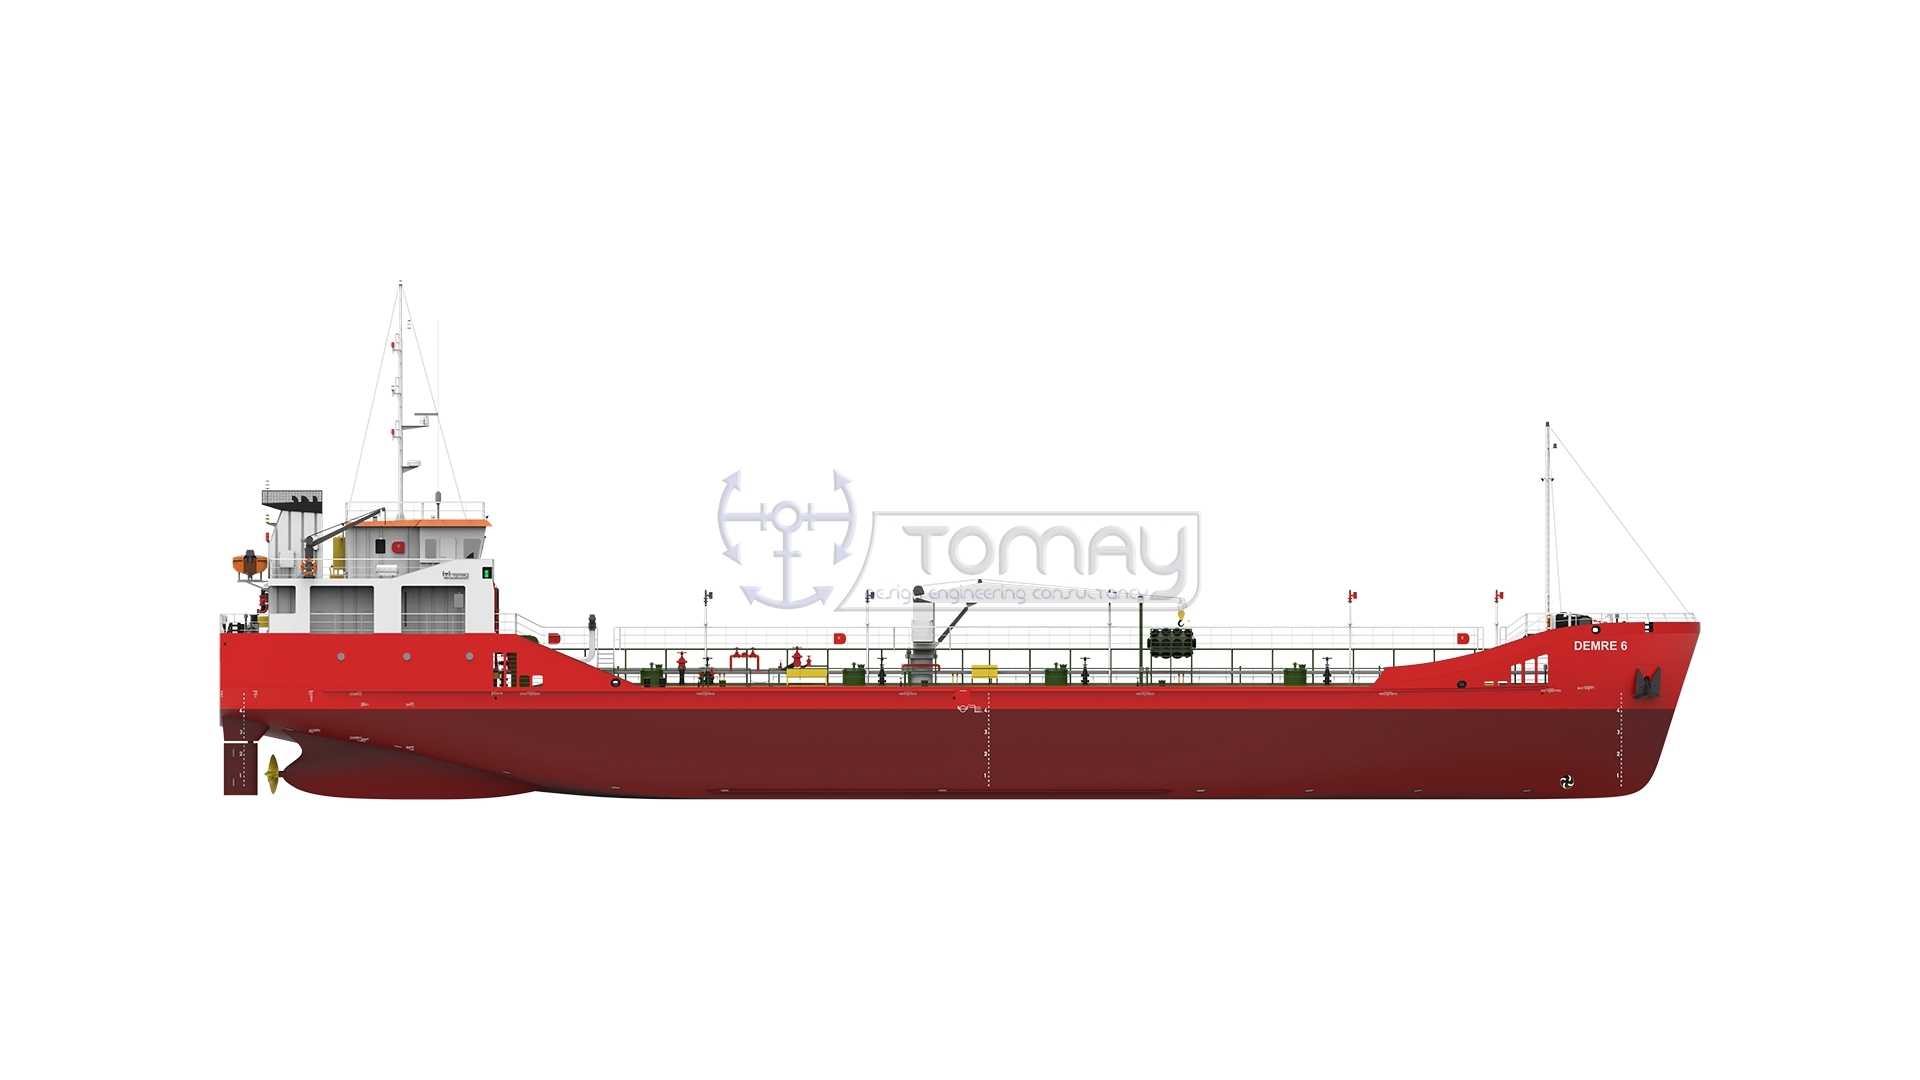 9150 Dwt oil & chemical tanker with electrical propulsion system supplied  by Ingeteam succesfully delivered to the owner by Yangzijiang shipbuilding  > Ingeteam Brasil > Press room